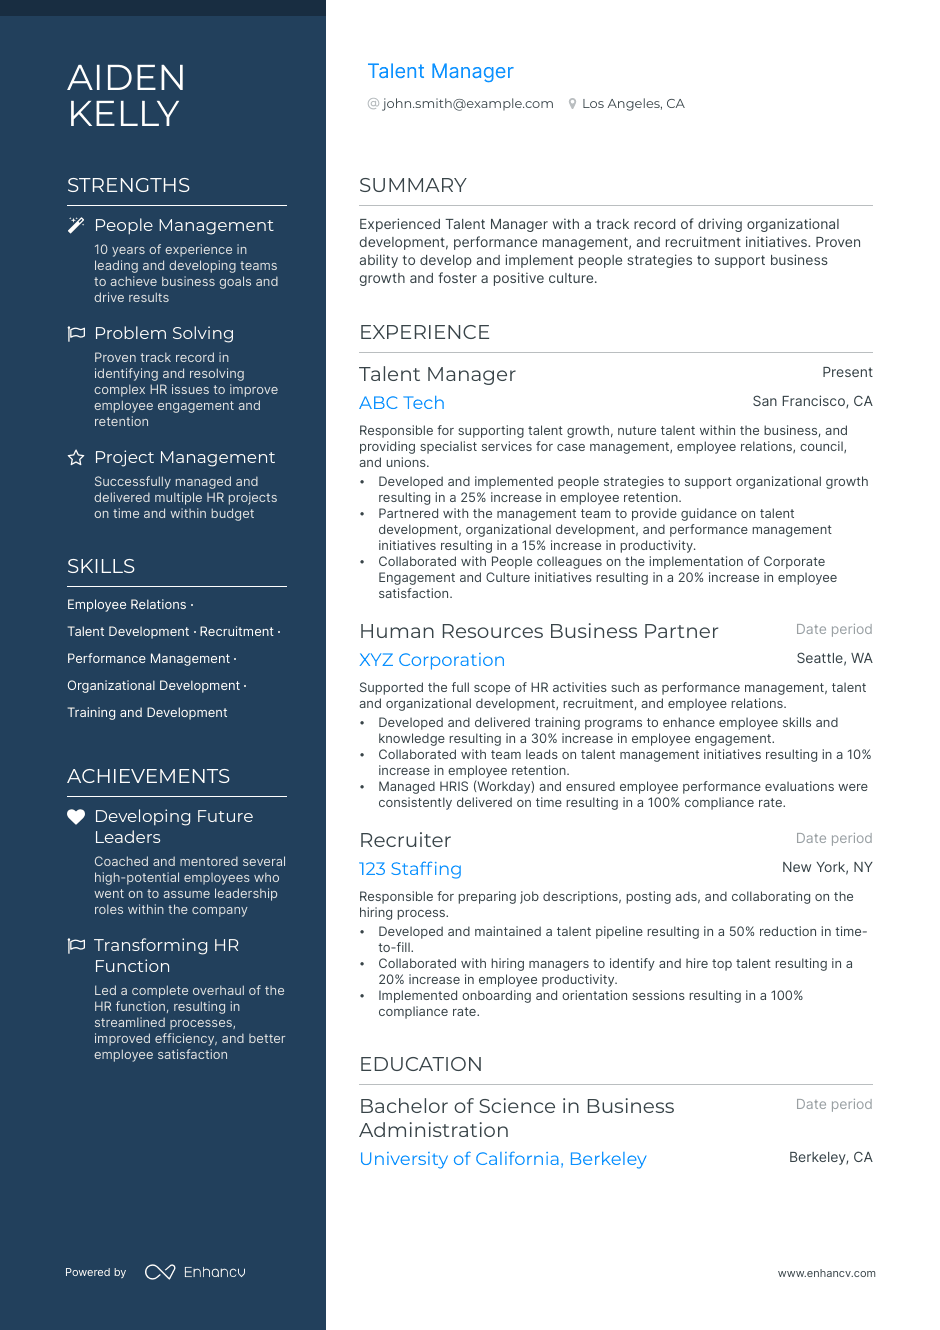 Talent Manager resume example